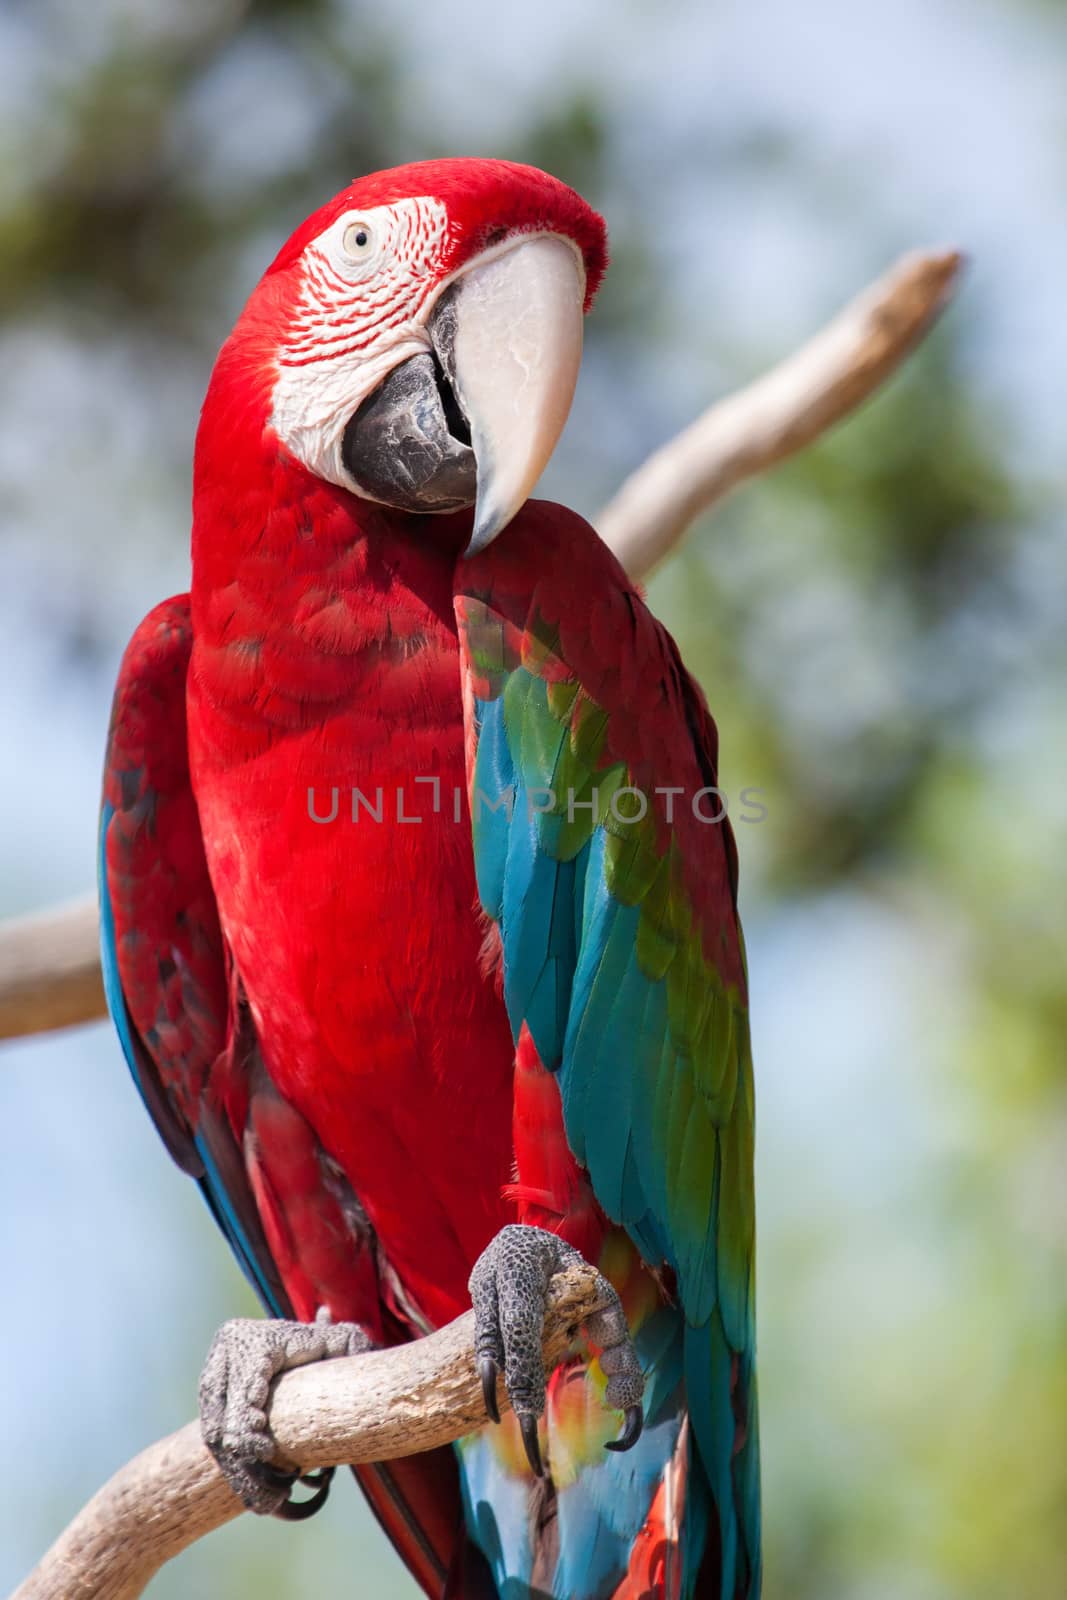 Red Macaw perched on a tree branch.